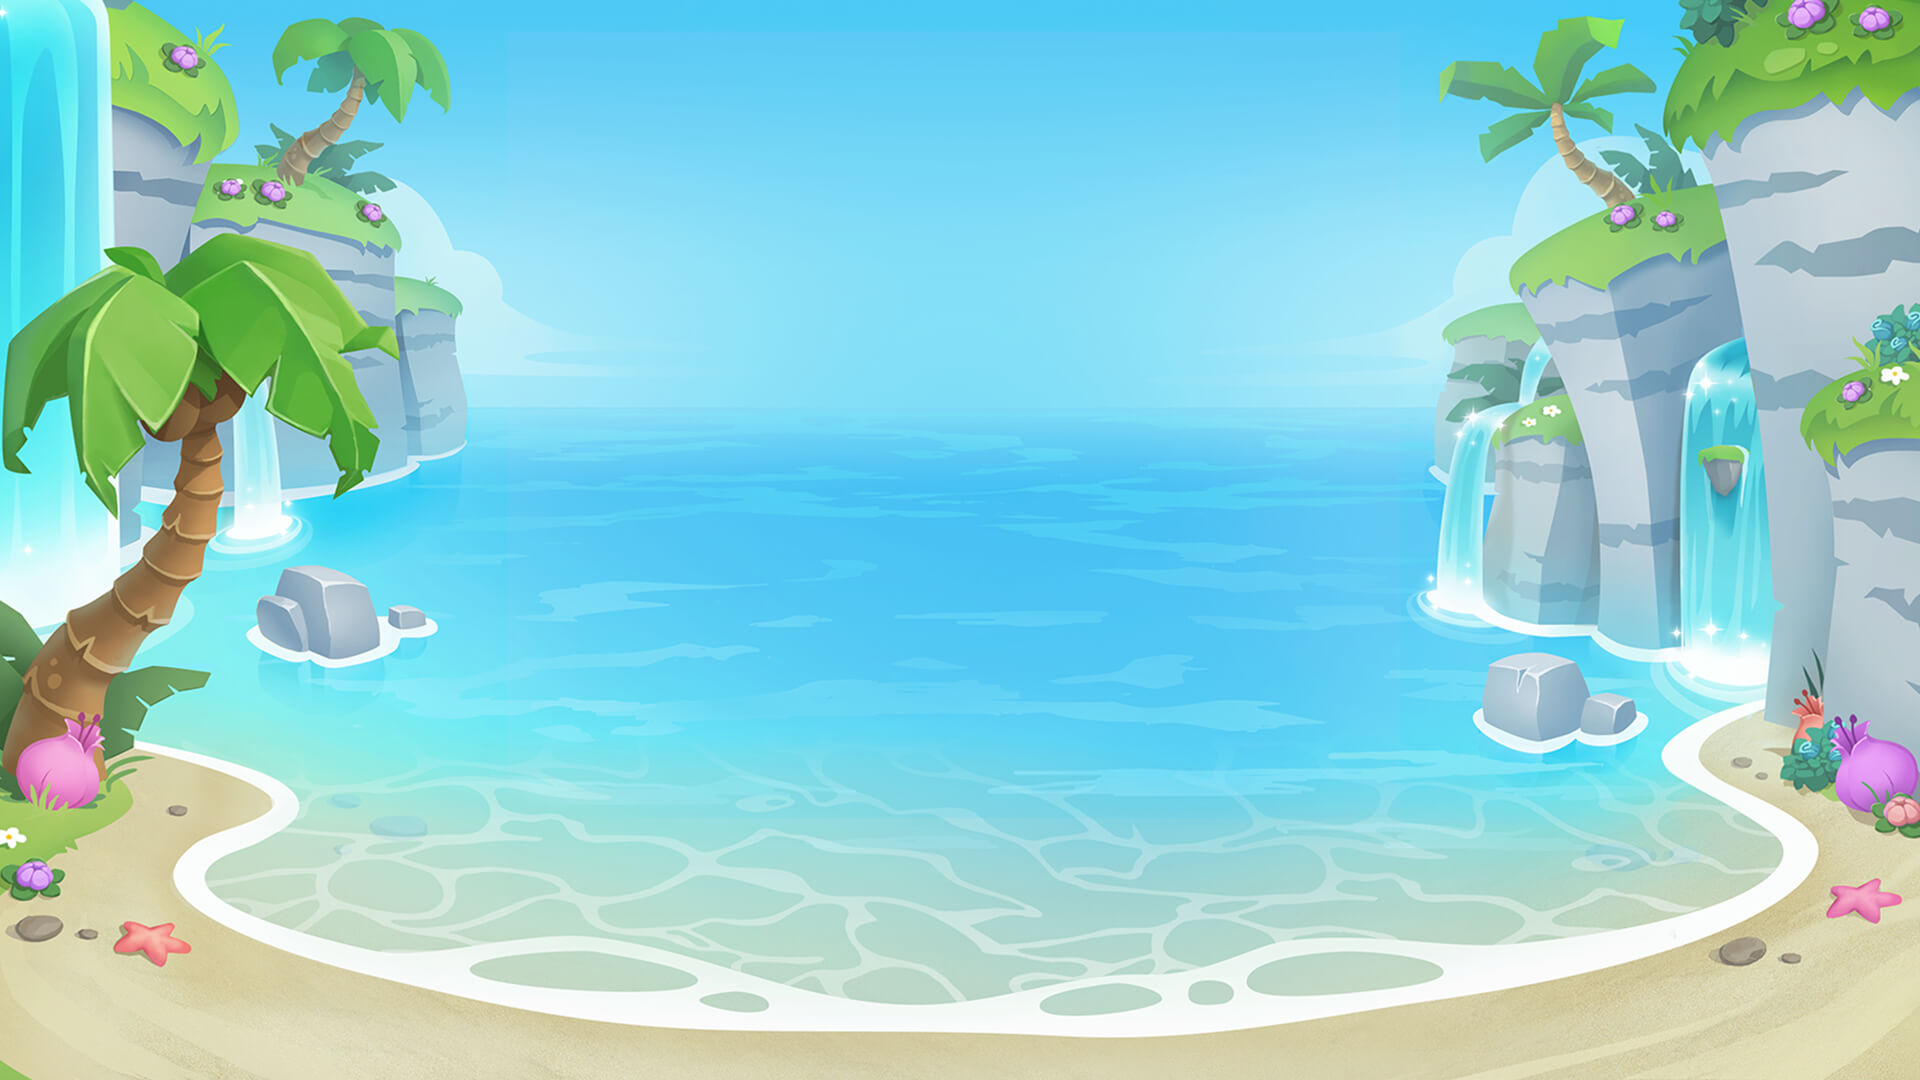 Game hight resolution background Sunny Shores